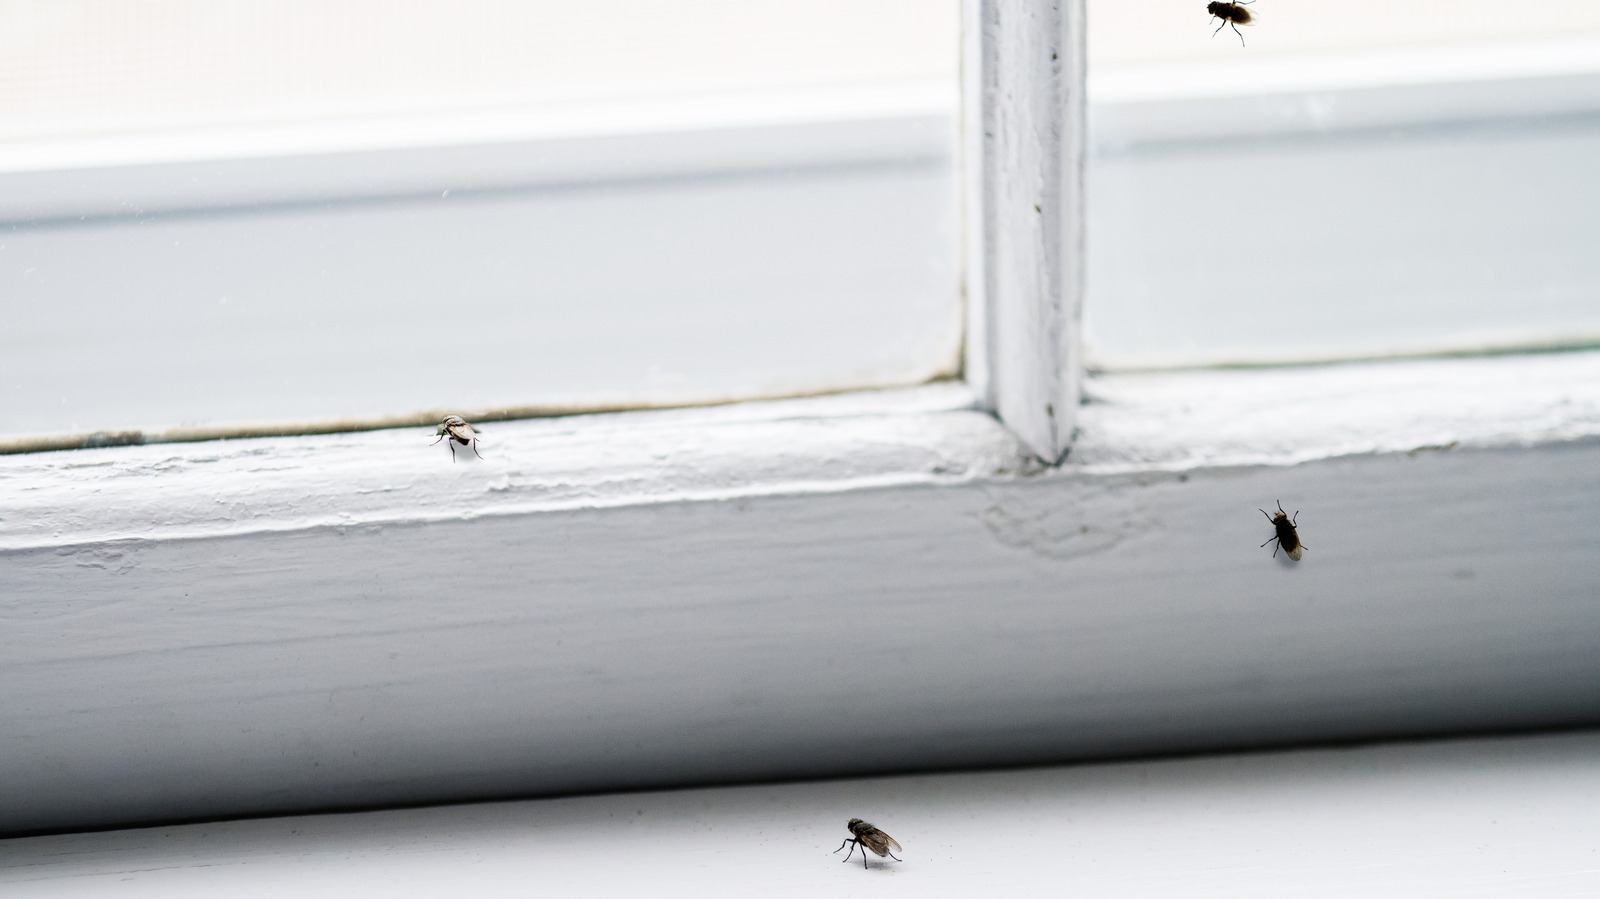 Life Hack: A simple but effective way to rid your home of flies